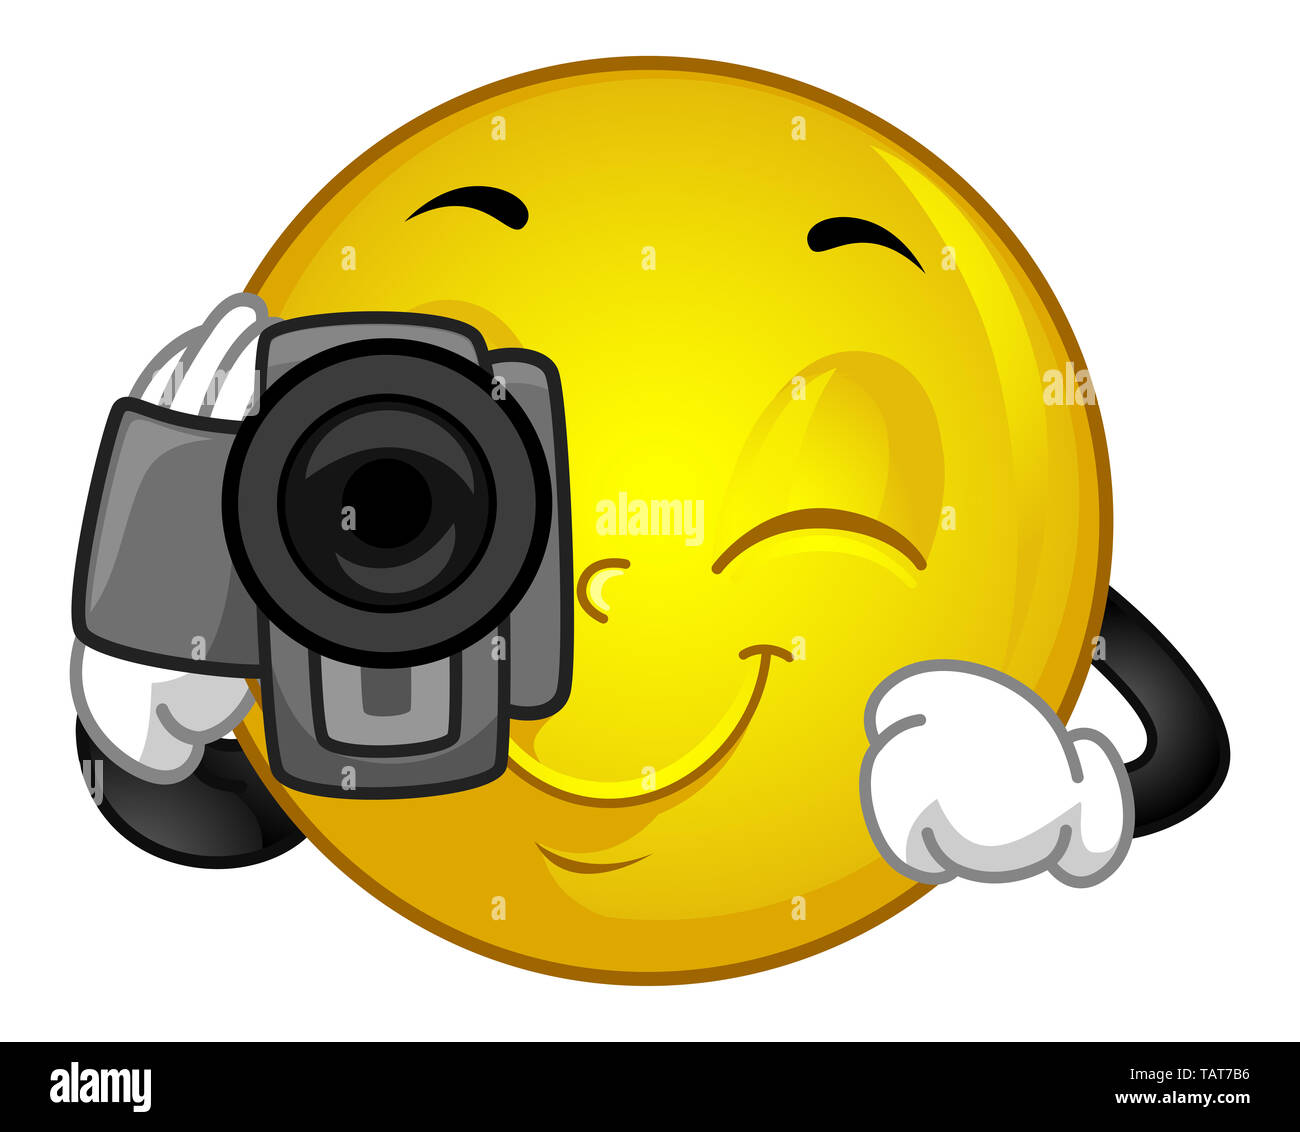 Illustration of a Smiley Mascot Happily Taking Video Using a Video Camera  Stock Photo - Alamy